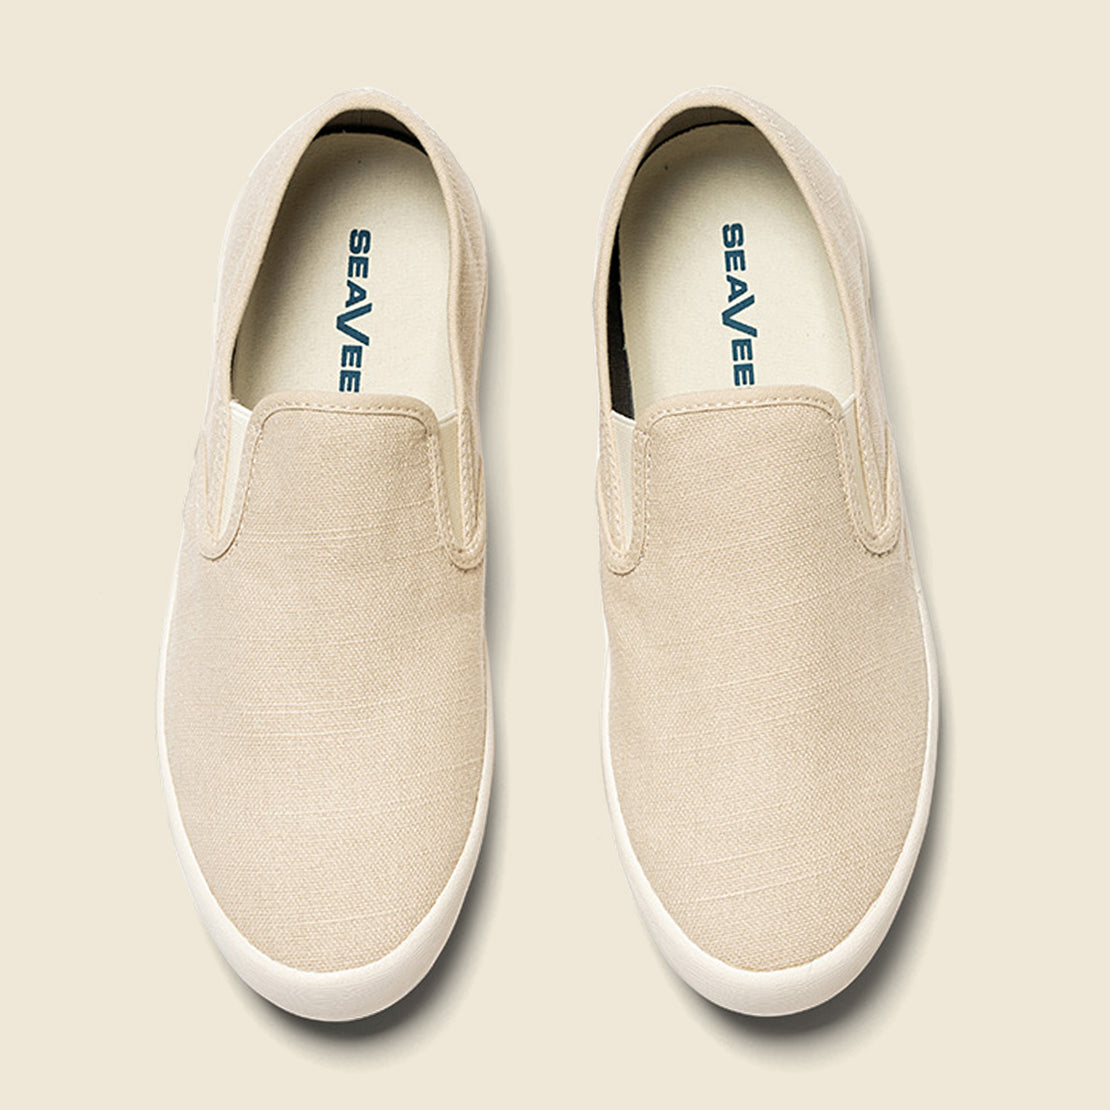 Baja Slip On - Natural - Seavees - STAG Provisions - Shoes - Athletic